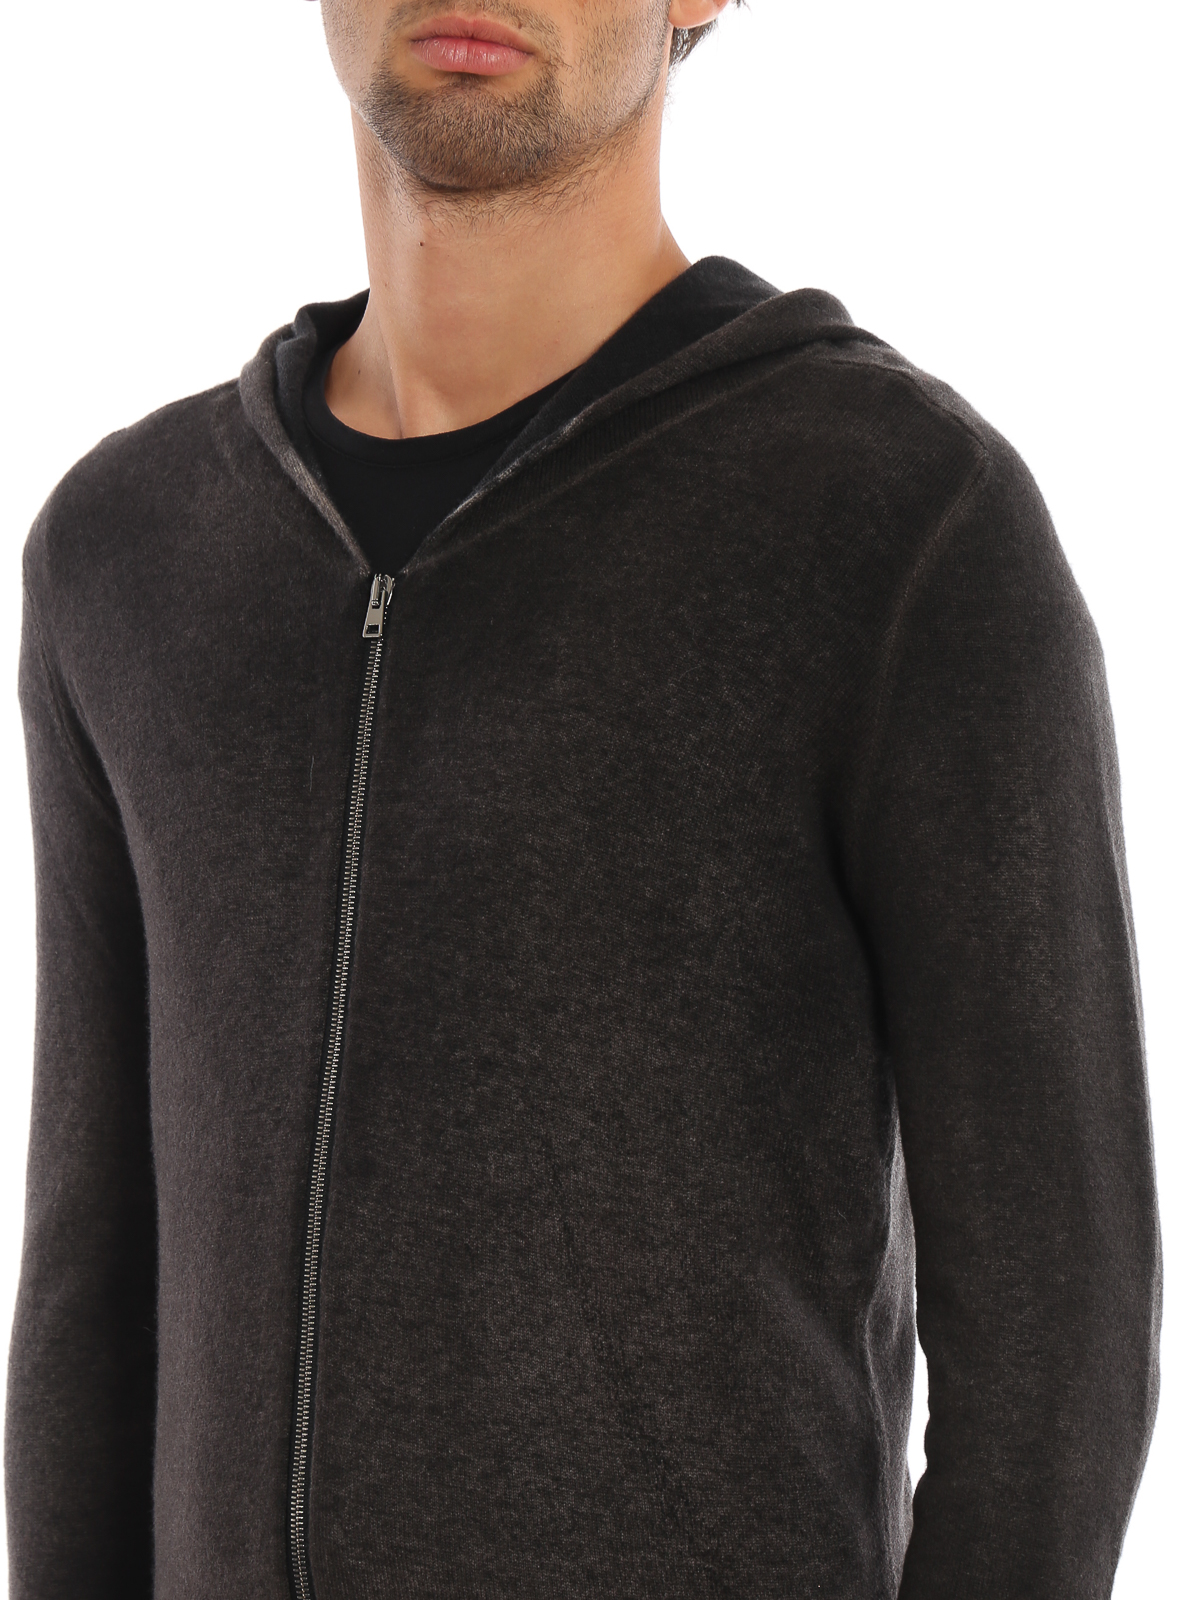 Cardigans Avant Toi - Merino wool and cashmere hooded zip cardigan 